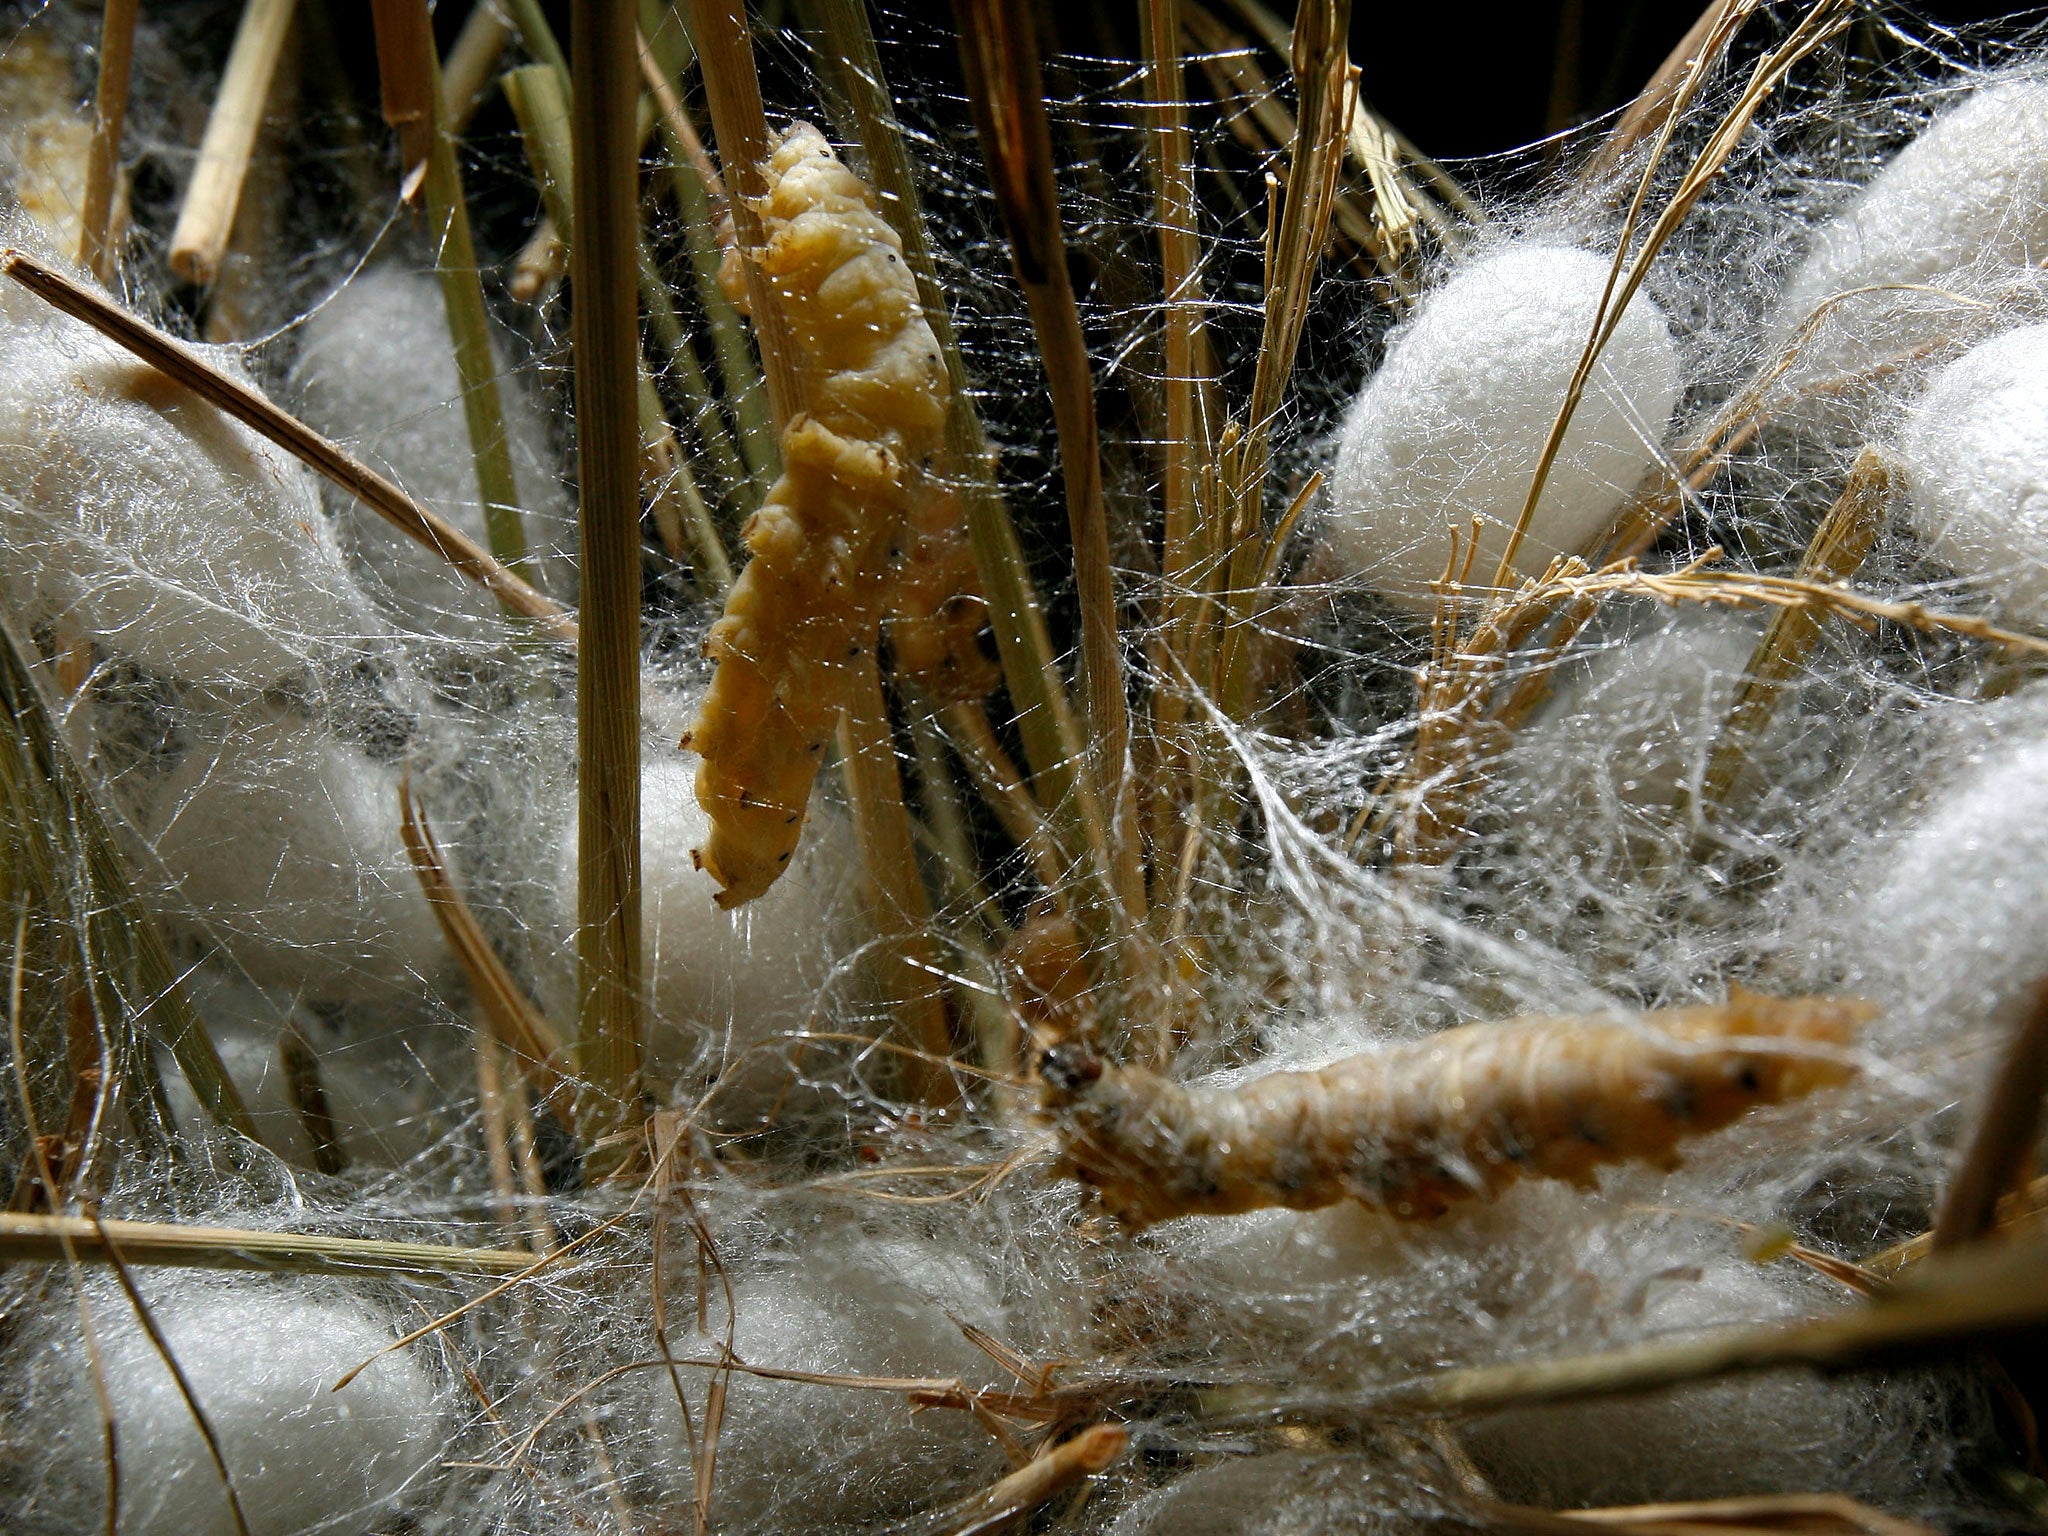 Silkworms spin cocoons among straws in a silk farm in China.